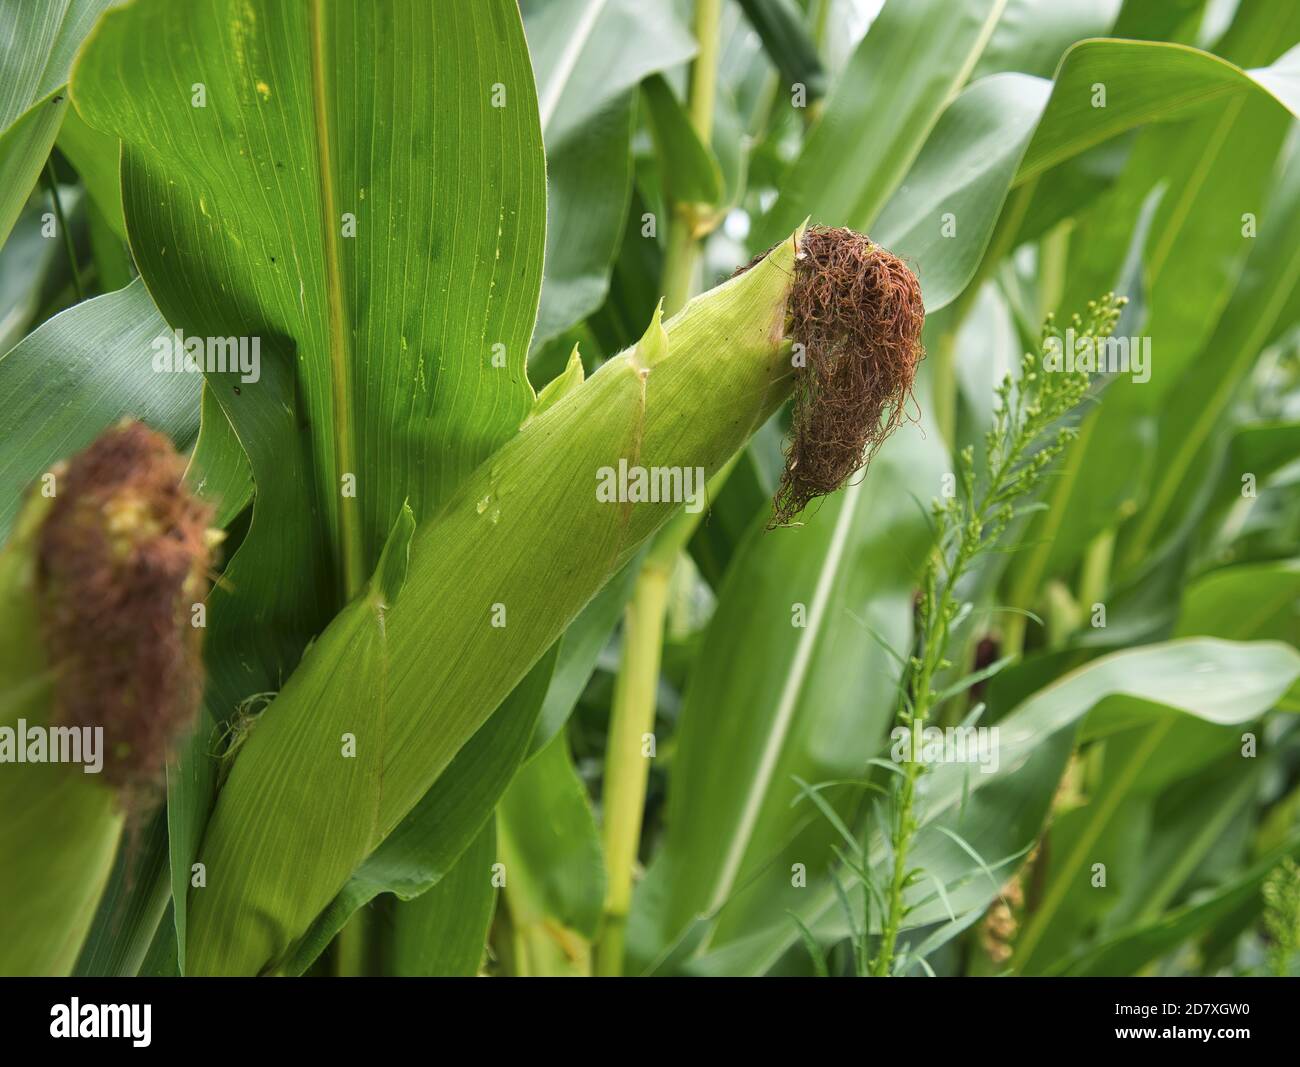 Close-up view of corn on the cob in the corn field, covered by the protective green bracts and brown corn beard that is drying. Individual raindrops o Stock Photo